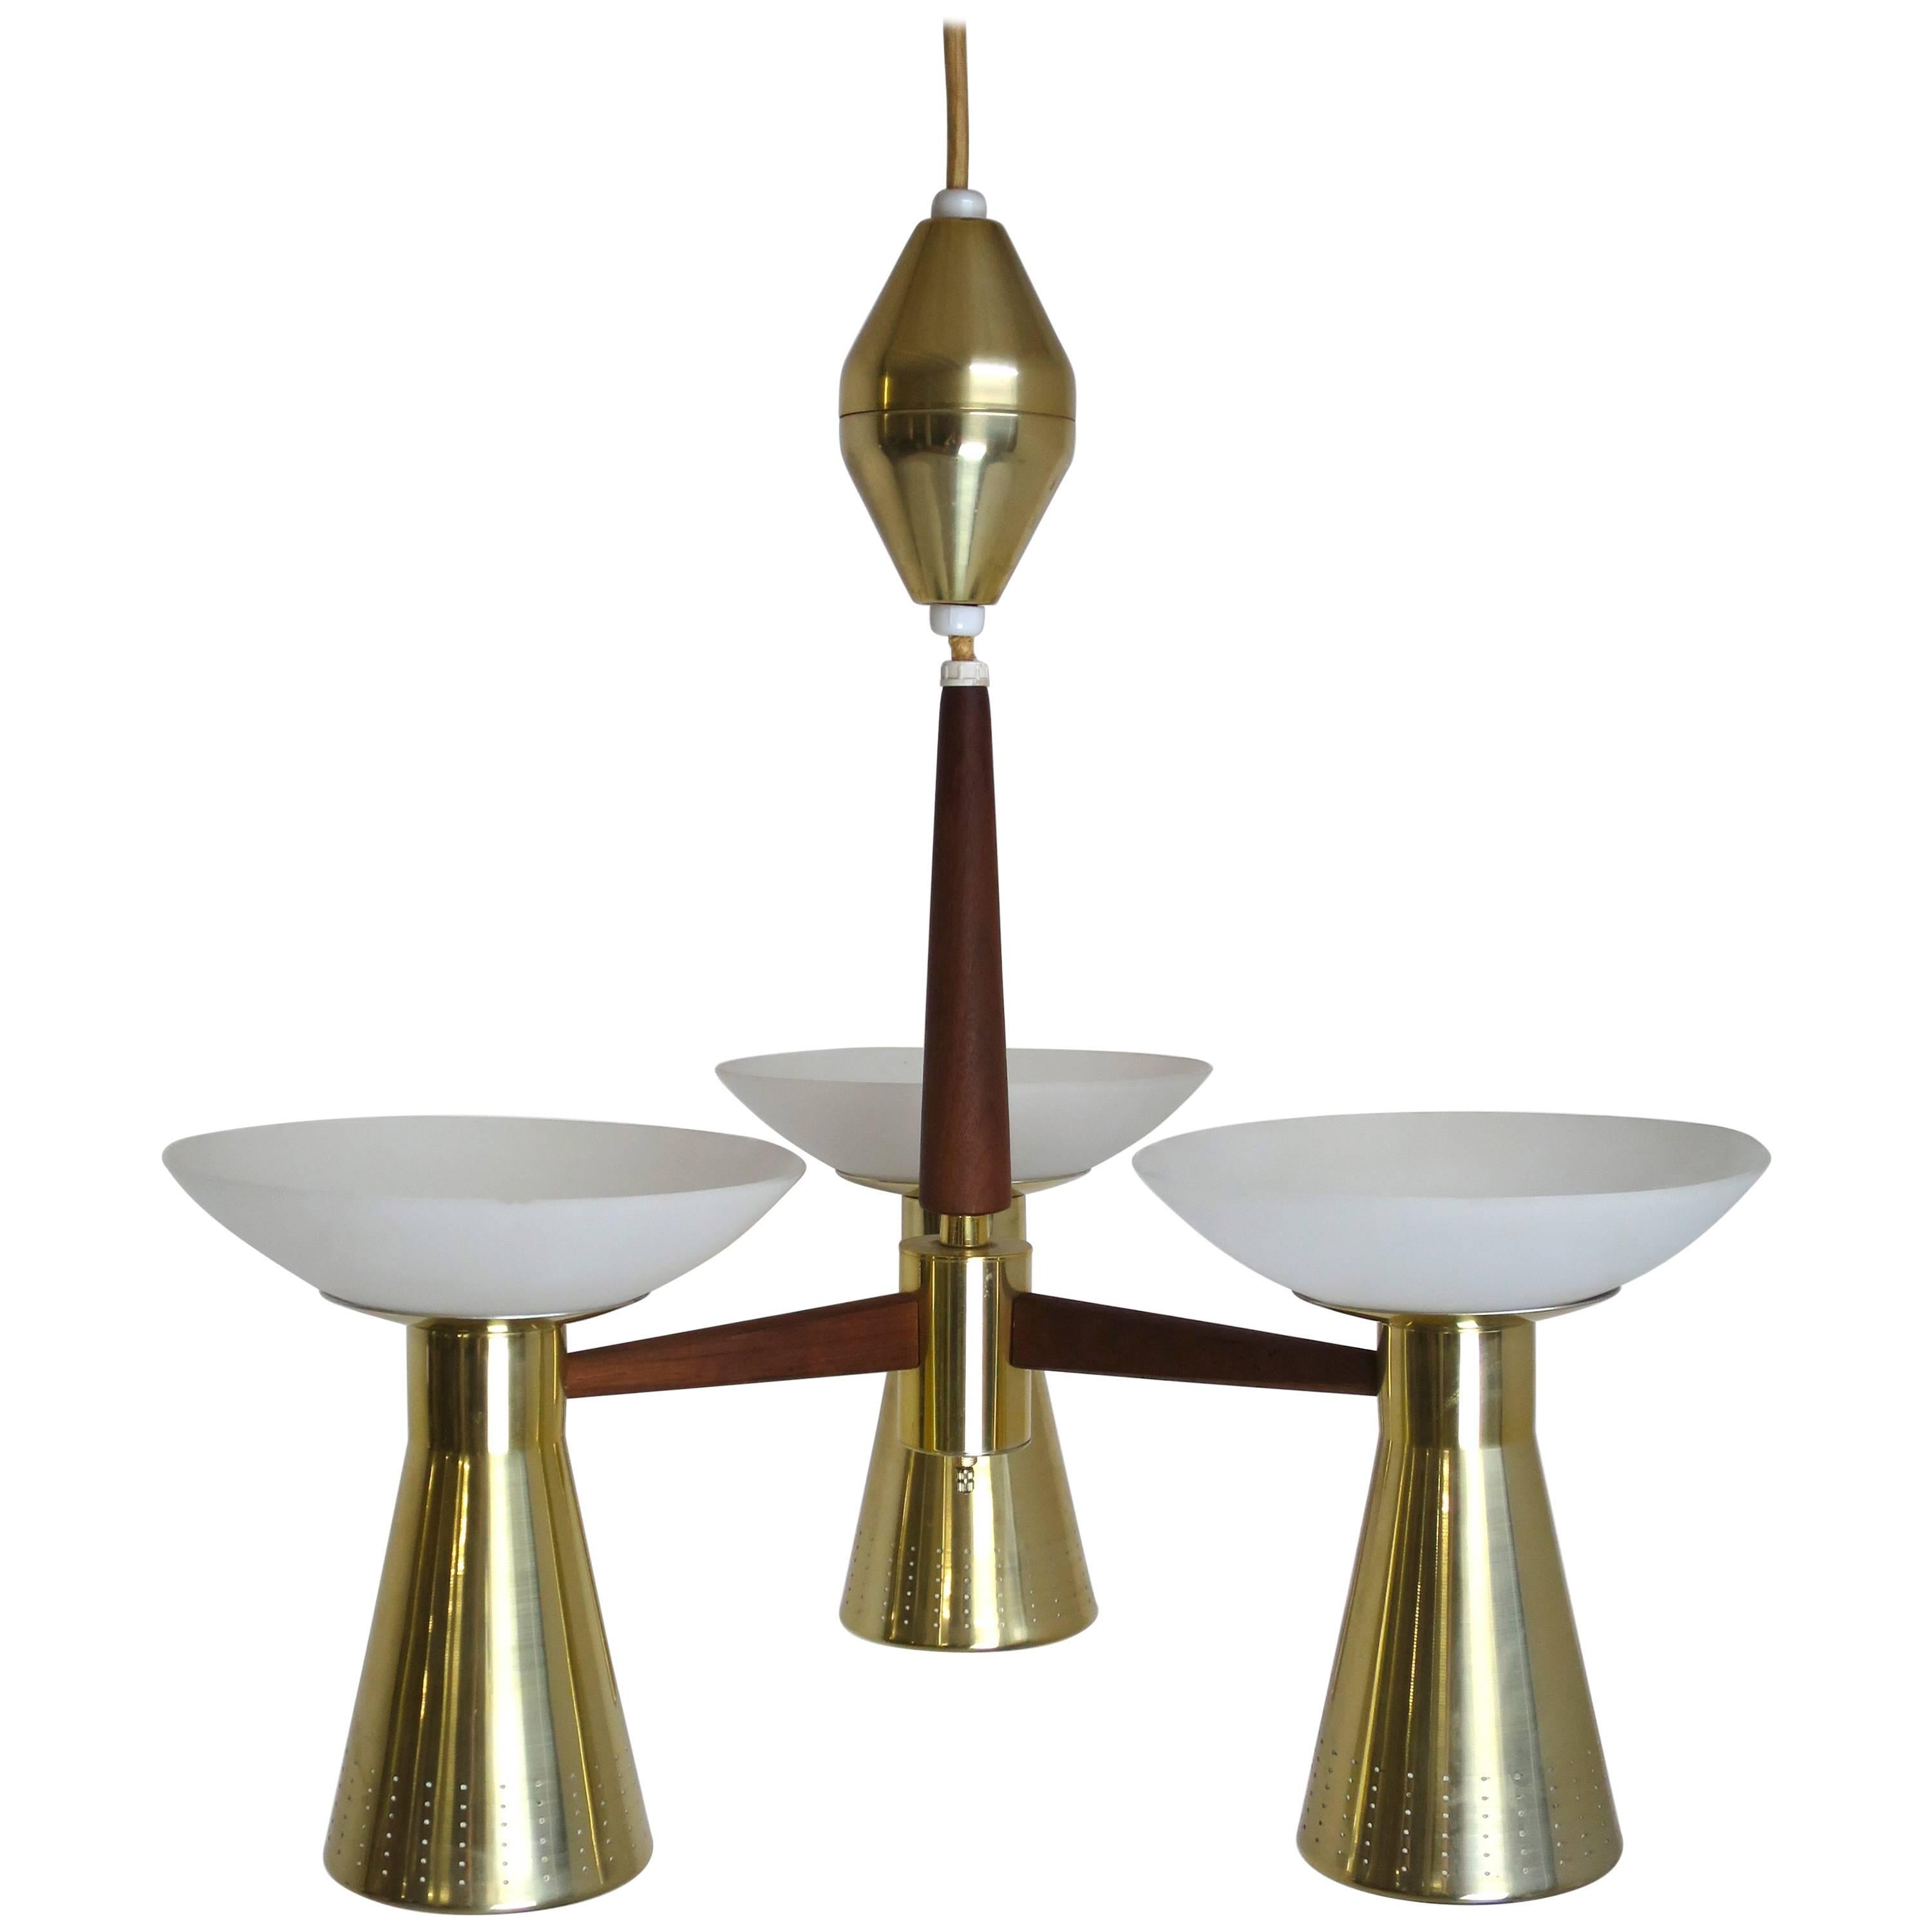 Modernist Perforated Brass and Walnut Chandelier, circa 1960s For Sale